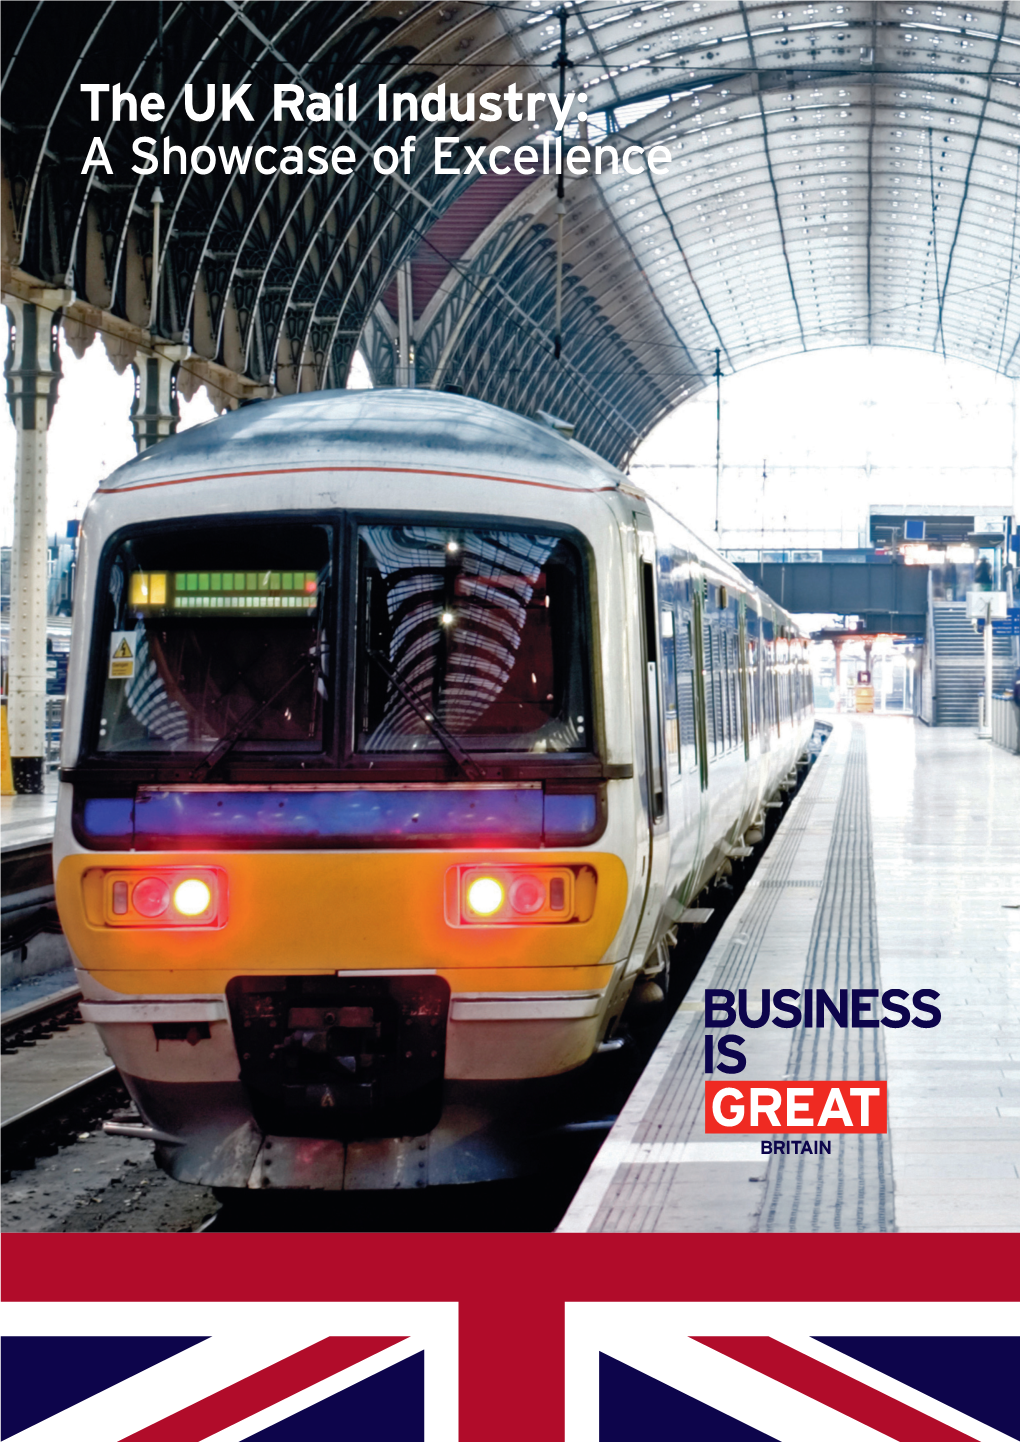 The UK Rail Industry: a Showcase of Excellence 1 the UK Rail Industry: a Showcase of Excellence